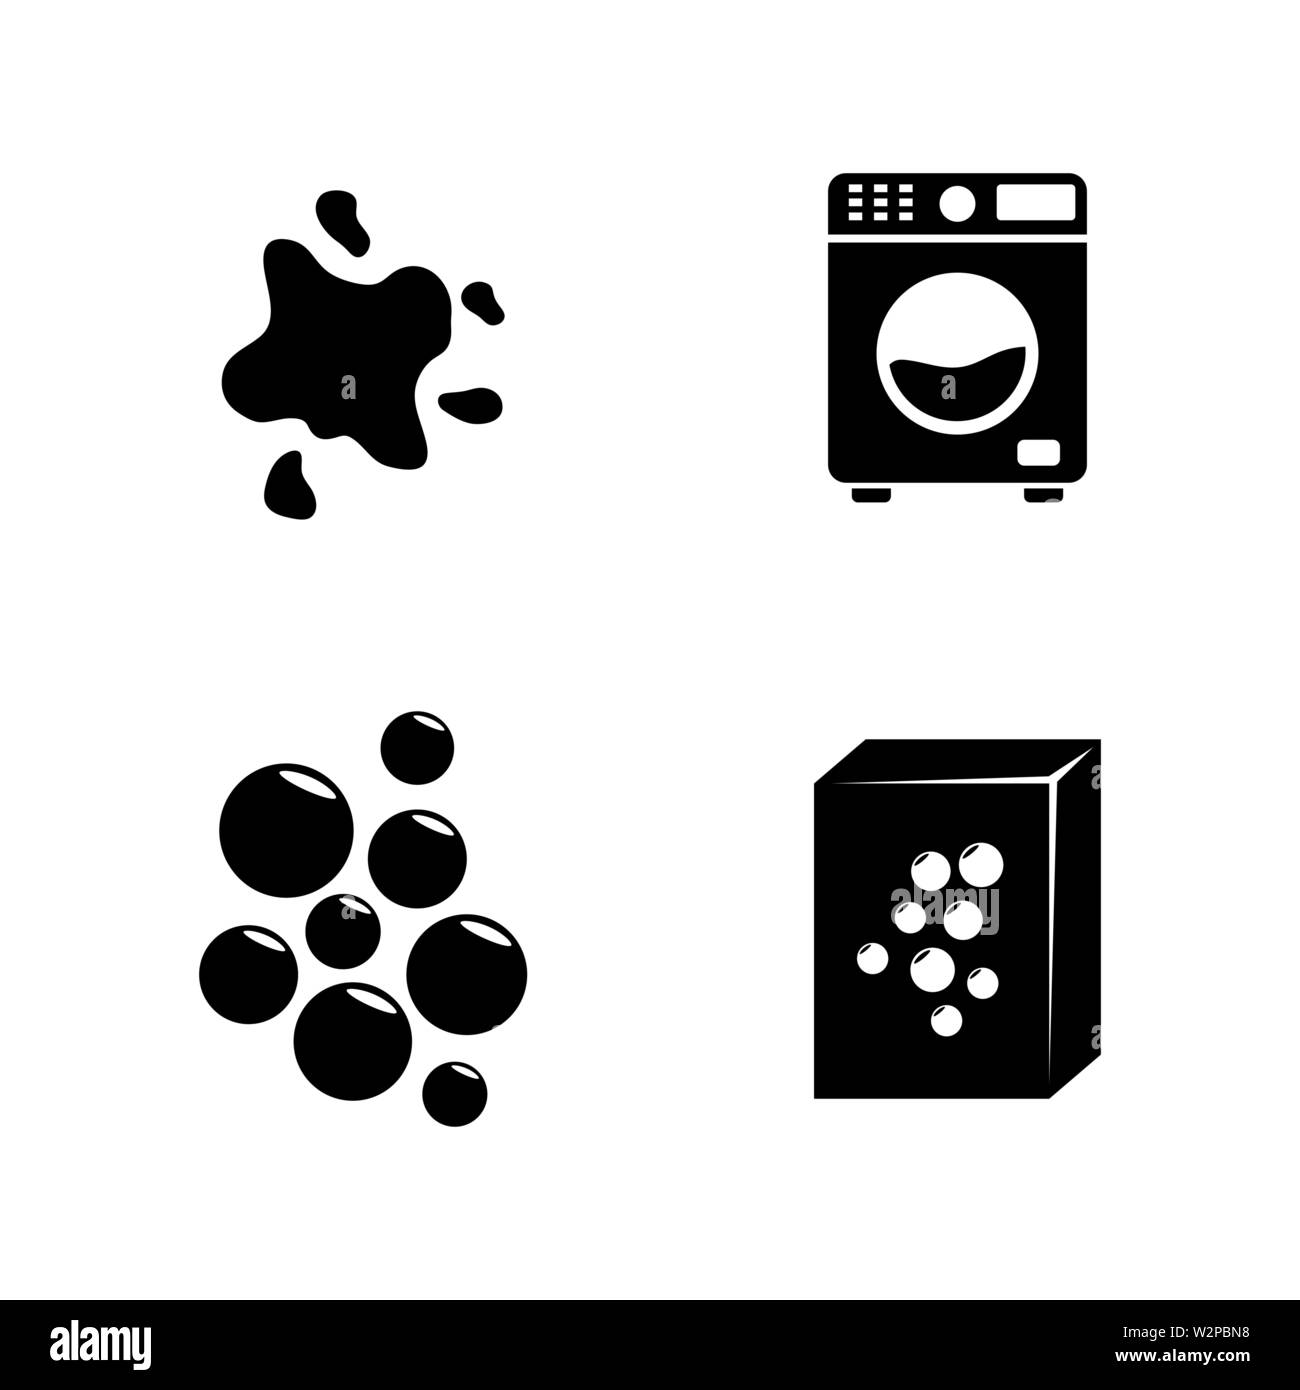 Laundry. Simple Related Vector Icons Set for Video, Mobile Apps, Web Sites, Print Projects and Your Design. Black Flat Illustration on White Backgroun Stock Vector